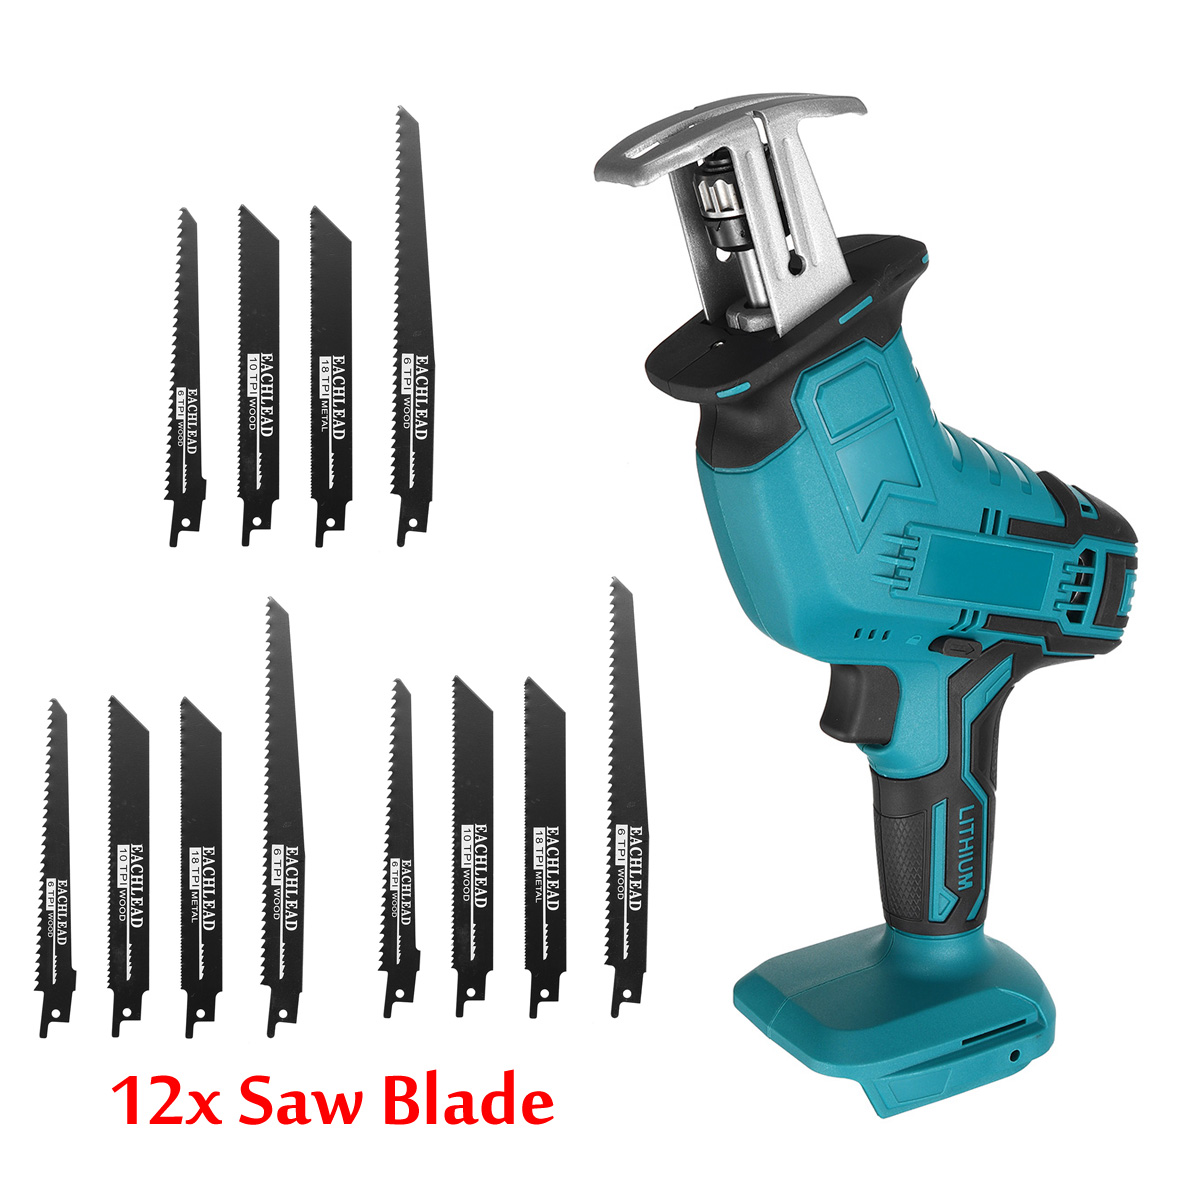 18V-Cordless-Electric-Reciprocating-Saw-Variable-Speed-Metal-Wood-Cutting-Tool-Saber-Saw-W-12X-Blade-1723641-6